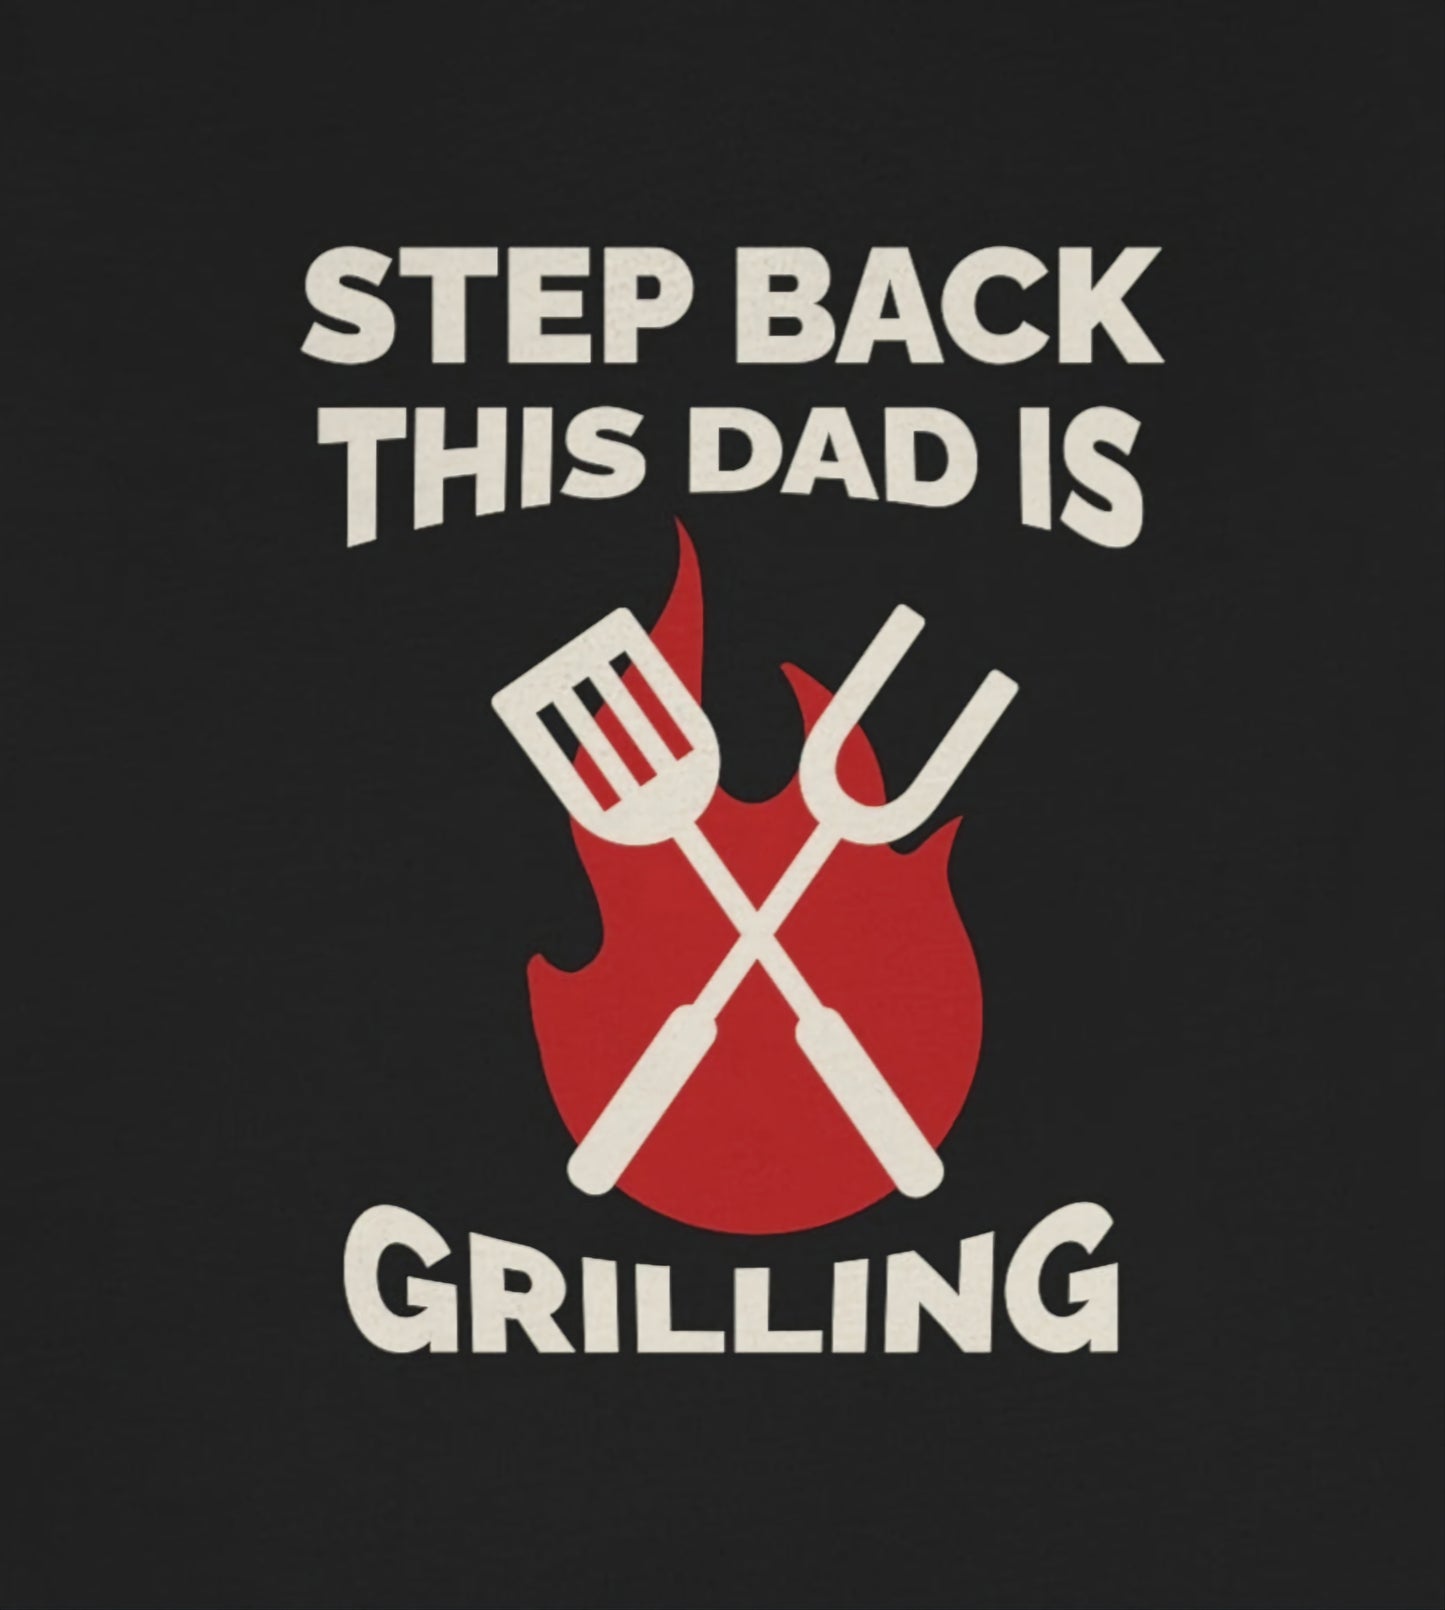 Step back, this dad is grilling - Funny Unisex Short Sleeve Tee - CrazyTomTShirts